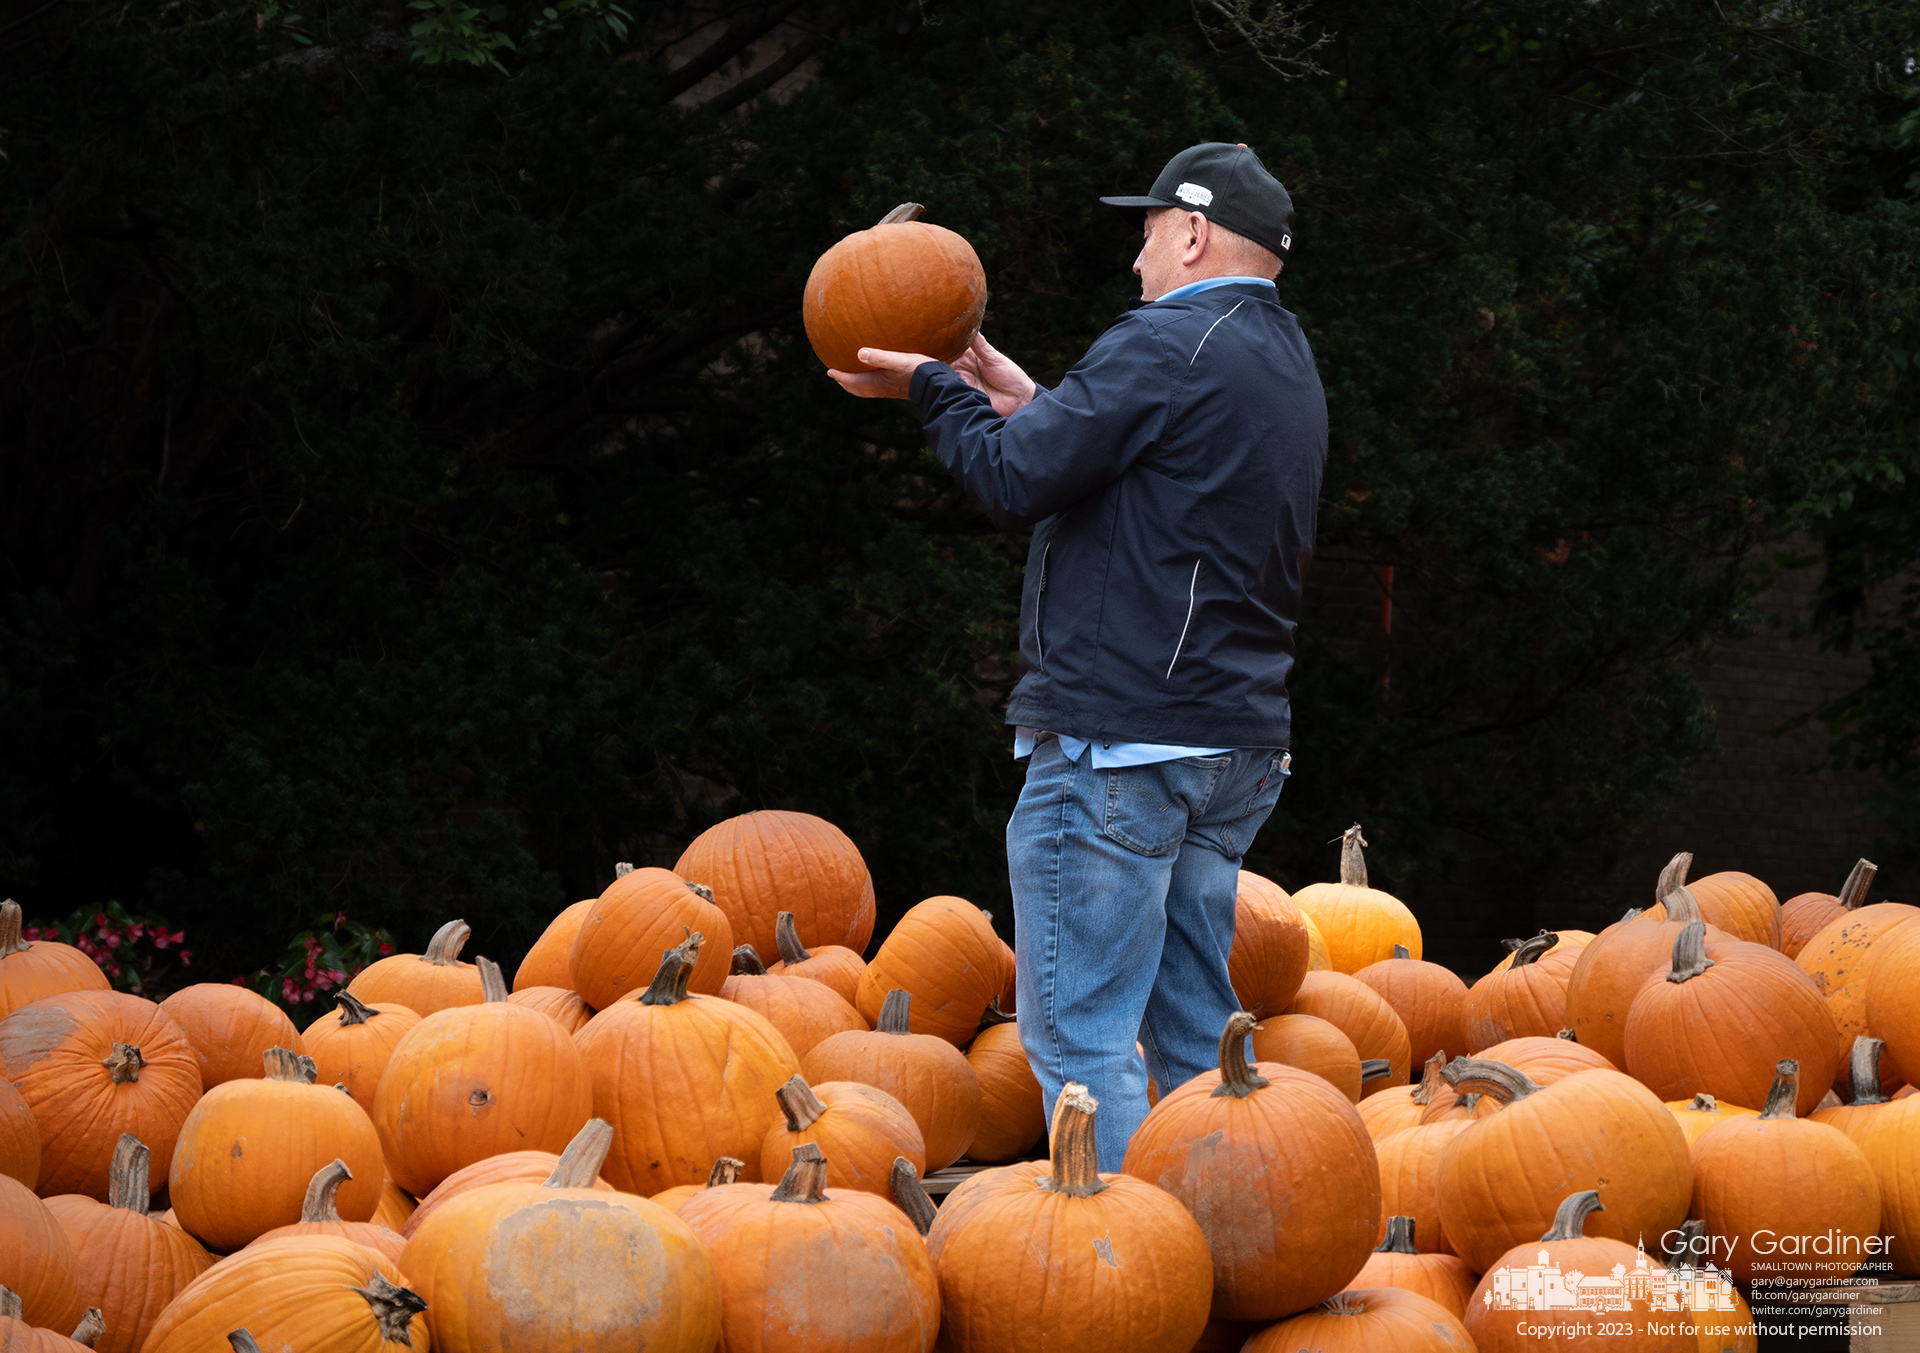 A customer lifts a pumpkin as he studies the selection of sizes and shapes of available pumpkins at the Boy Scout Troop 84 Pumpkin Patch in front of the Masonic Hall in Uptown. My Final Photo for October 15, 2023.